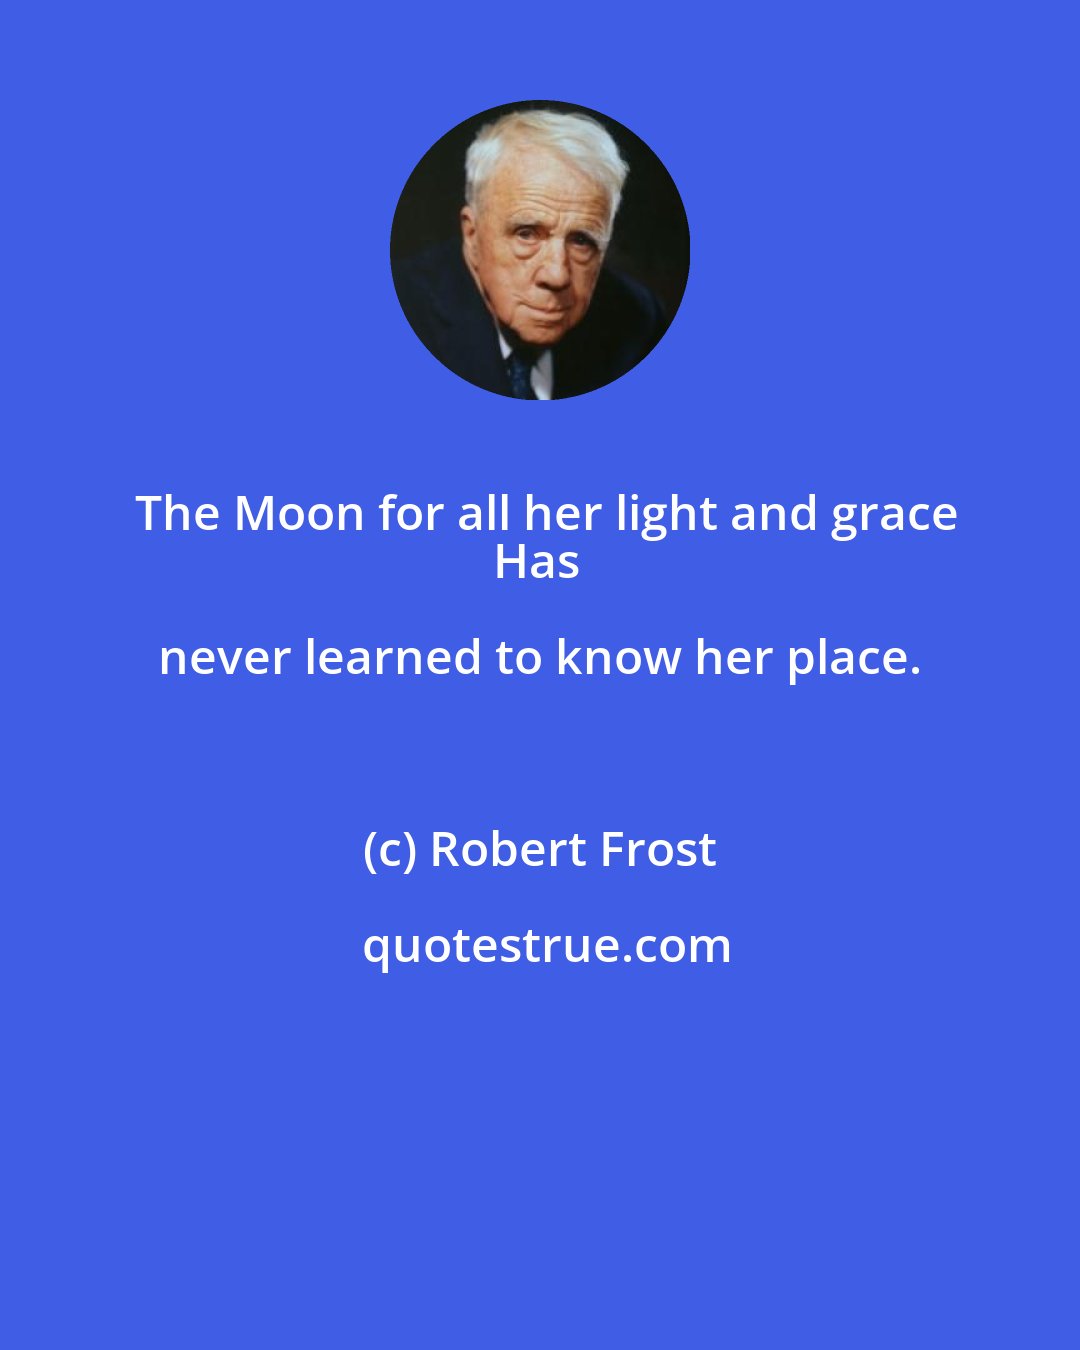 Robert Frost: The Moon for all her light and grace
Has never learned to know her place.